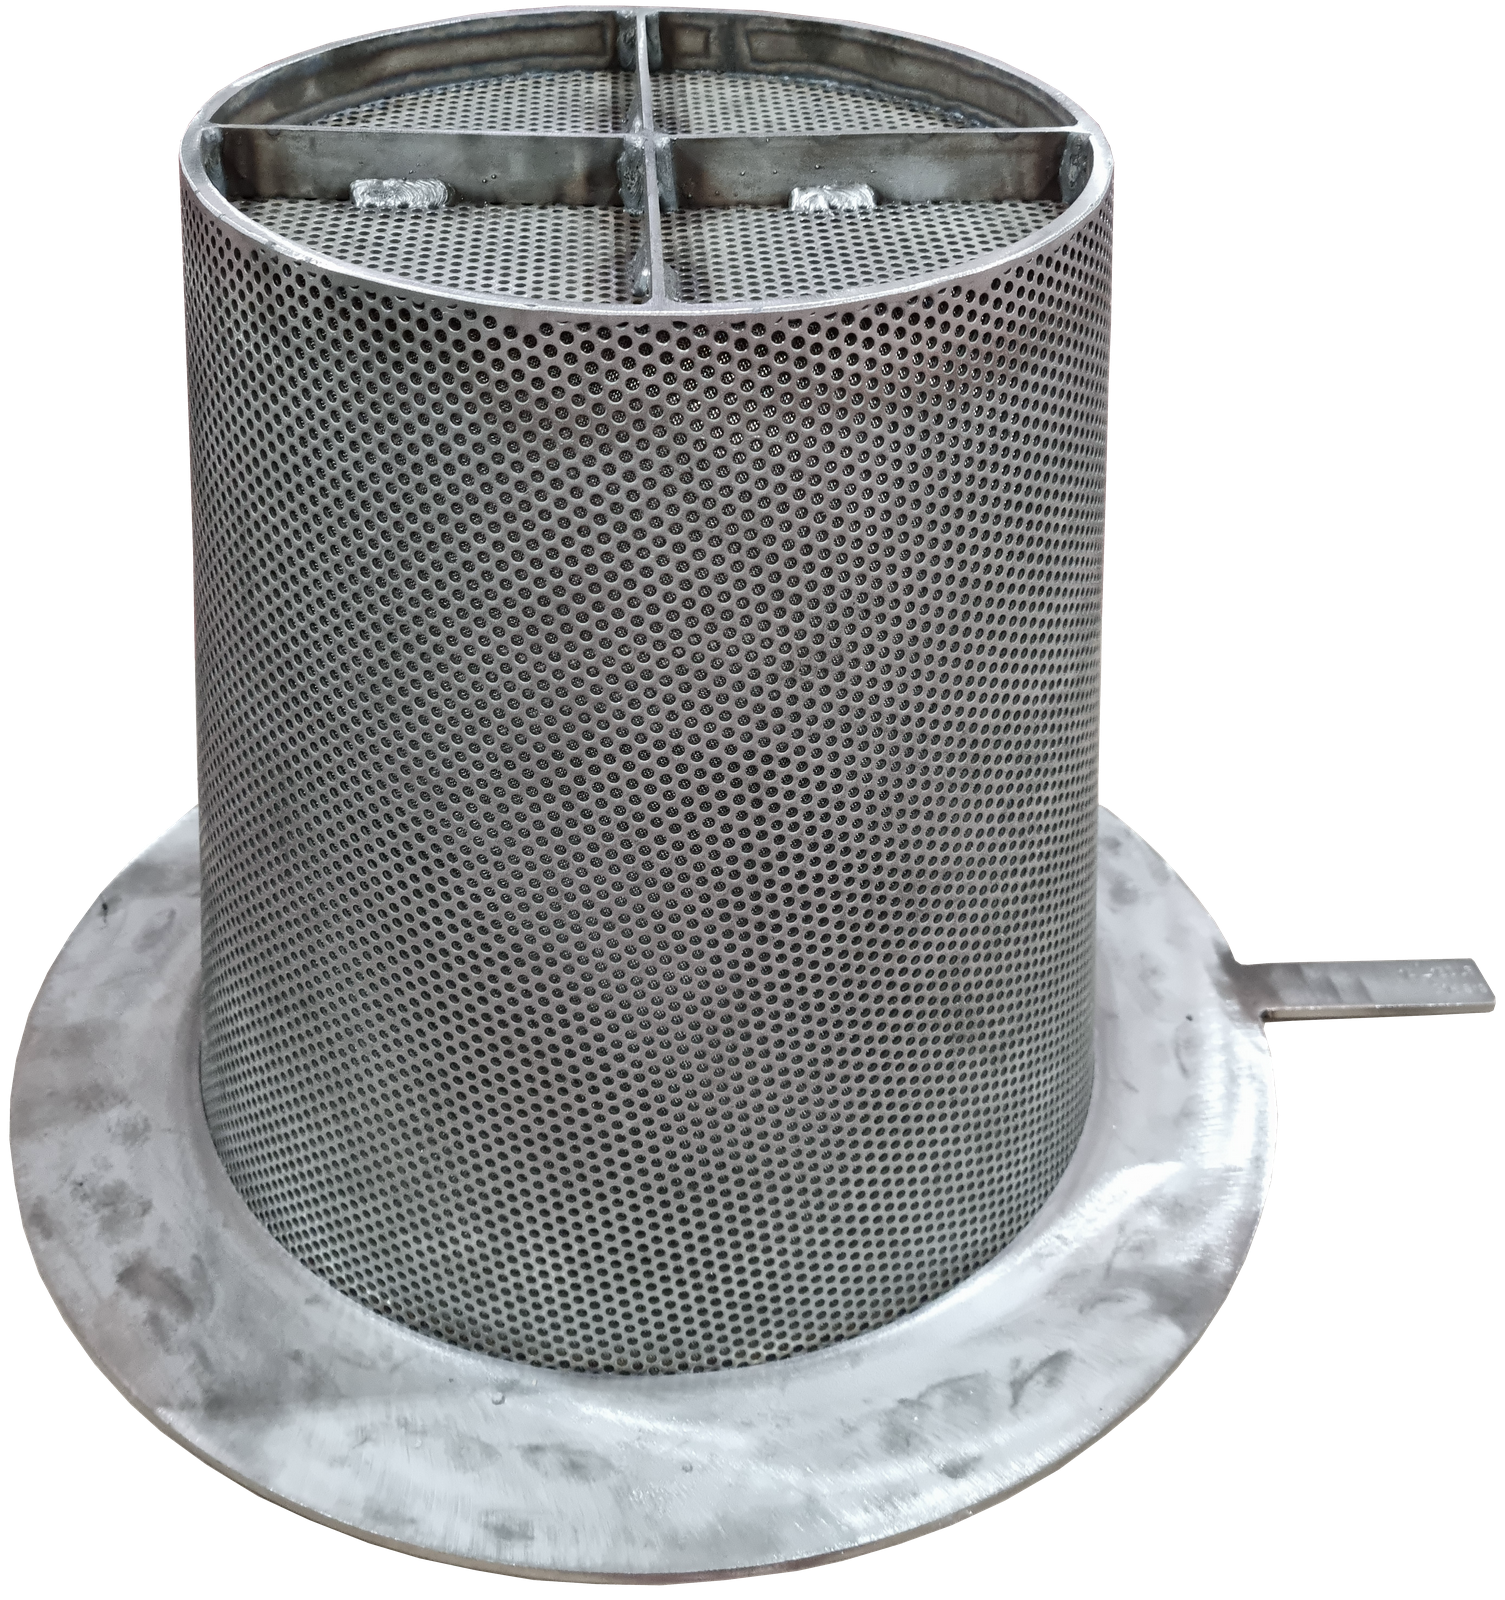 Temporary Strainers: Basket Type